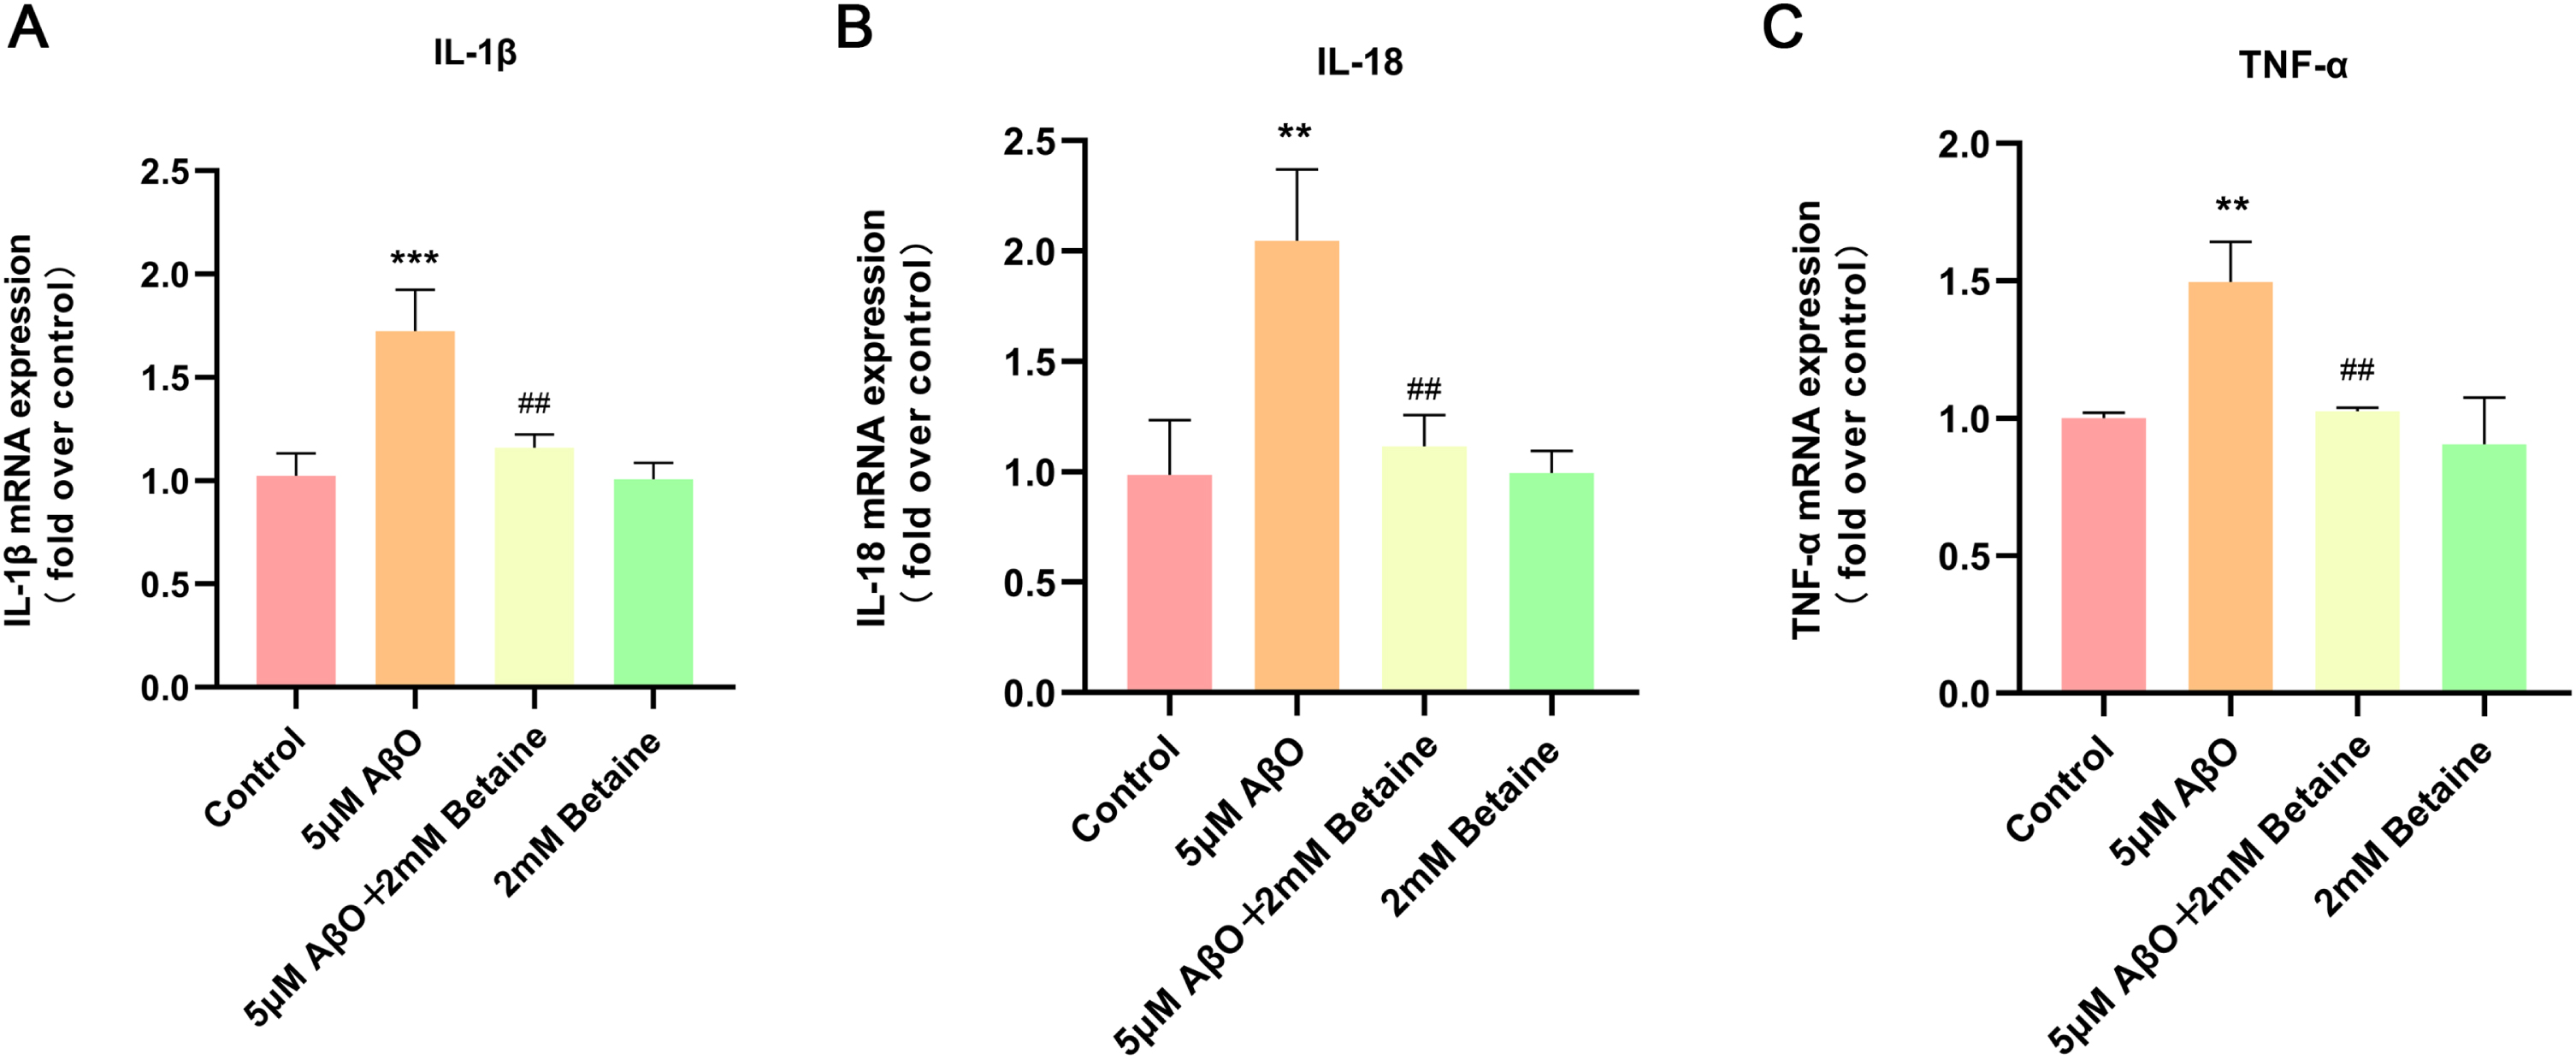 Effect of betaine on AβO-induced inflammatory cytokine production in BV2 cells. A–C) The mRNA levels of IL-1β, IL-18, and TNF-α were analyzed by qRT-PCR. The data were collected from three independent experiments (n = 3). **p < 0.01, ***p < 0.001 versus the control group. # #p < 0.01 versus the AβO group.